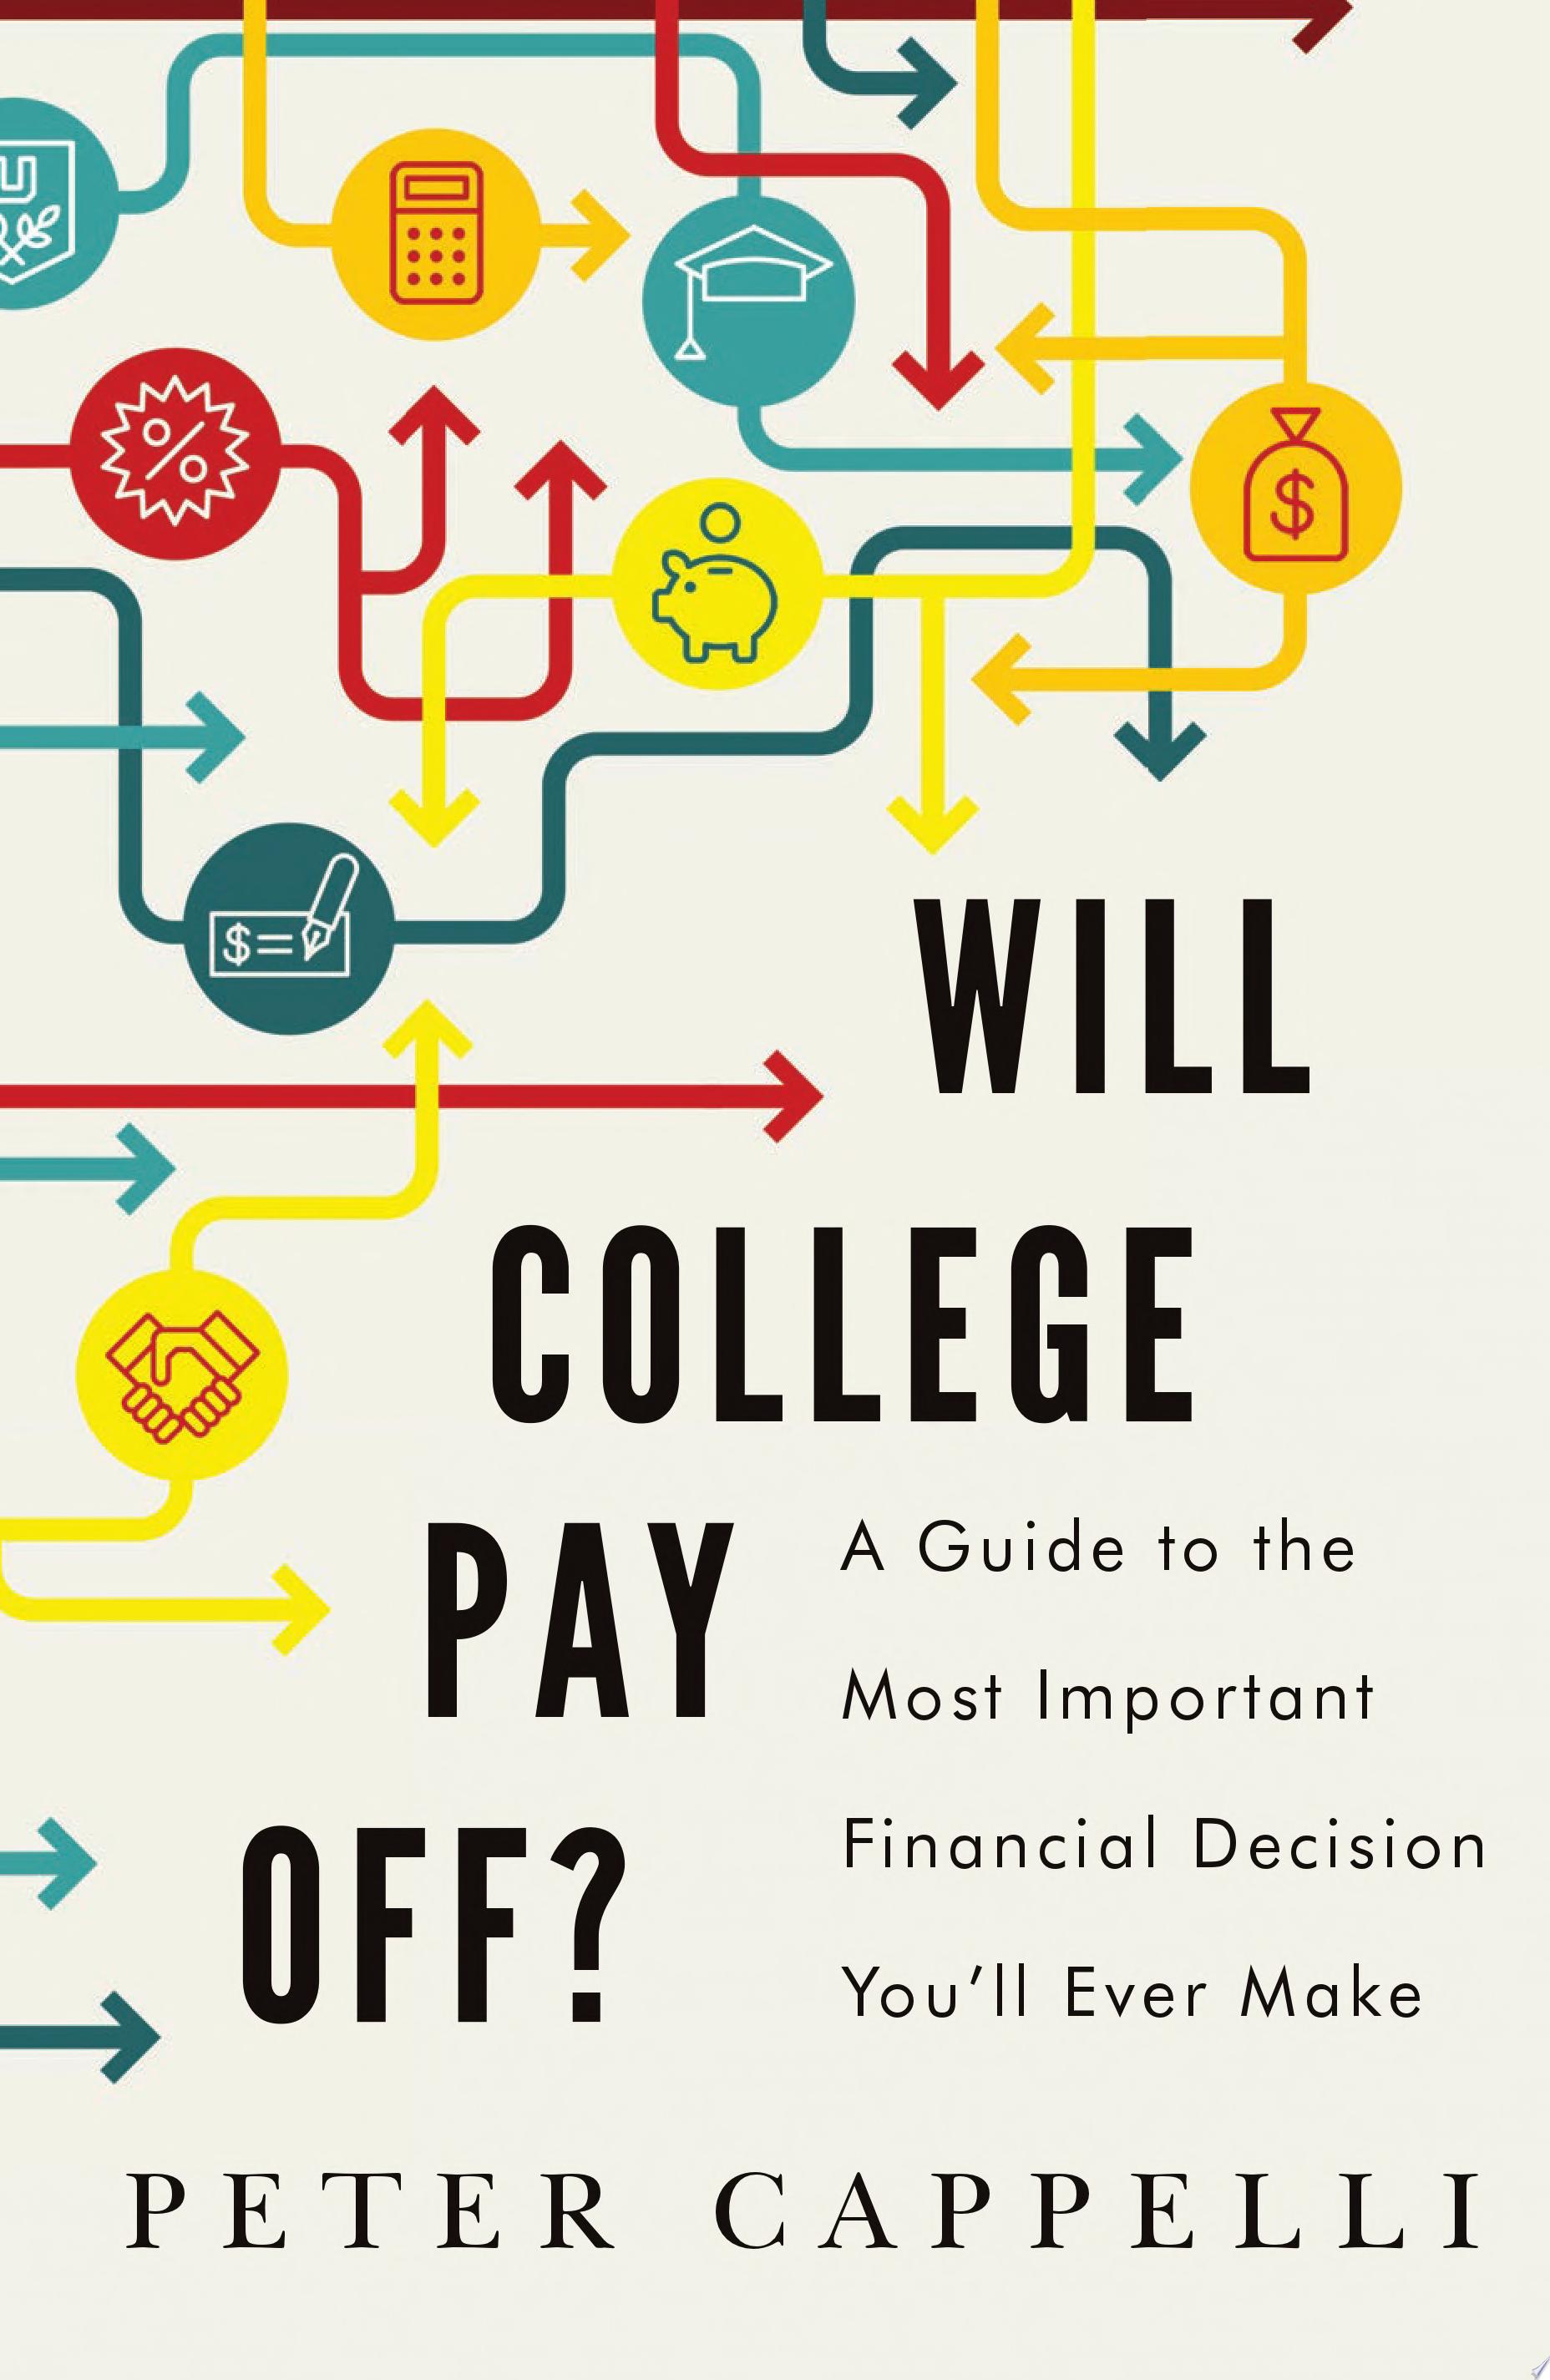 Image for "Will College Pay Off?"